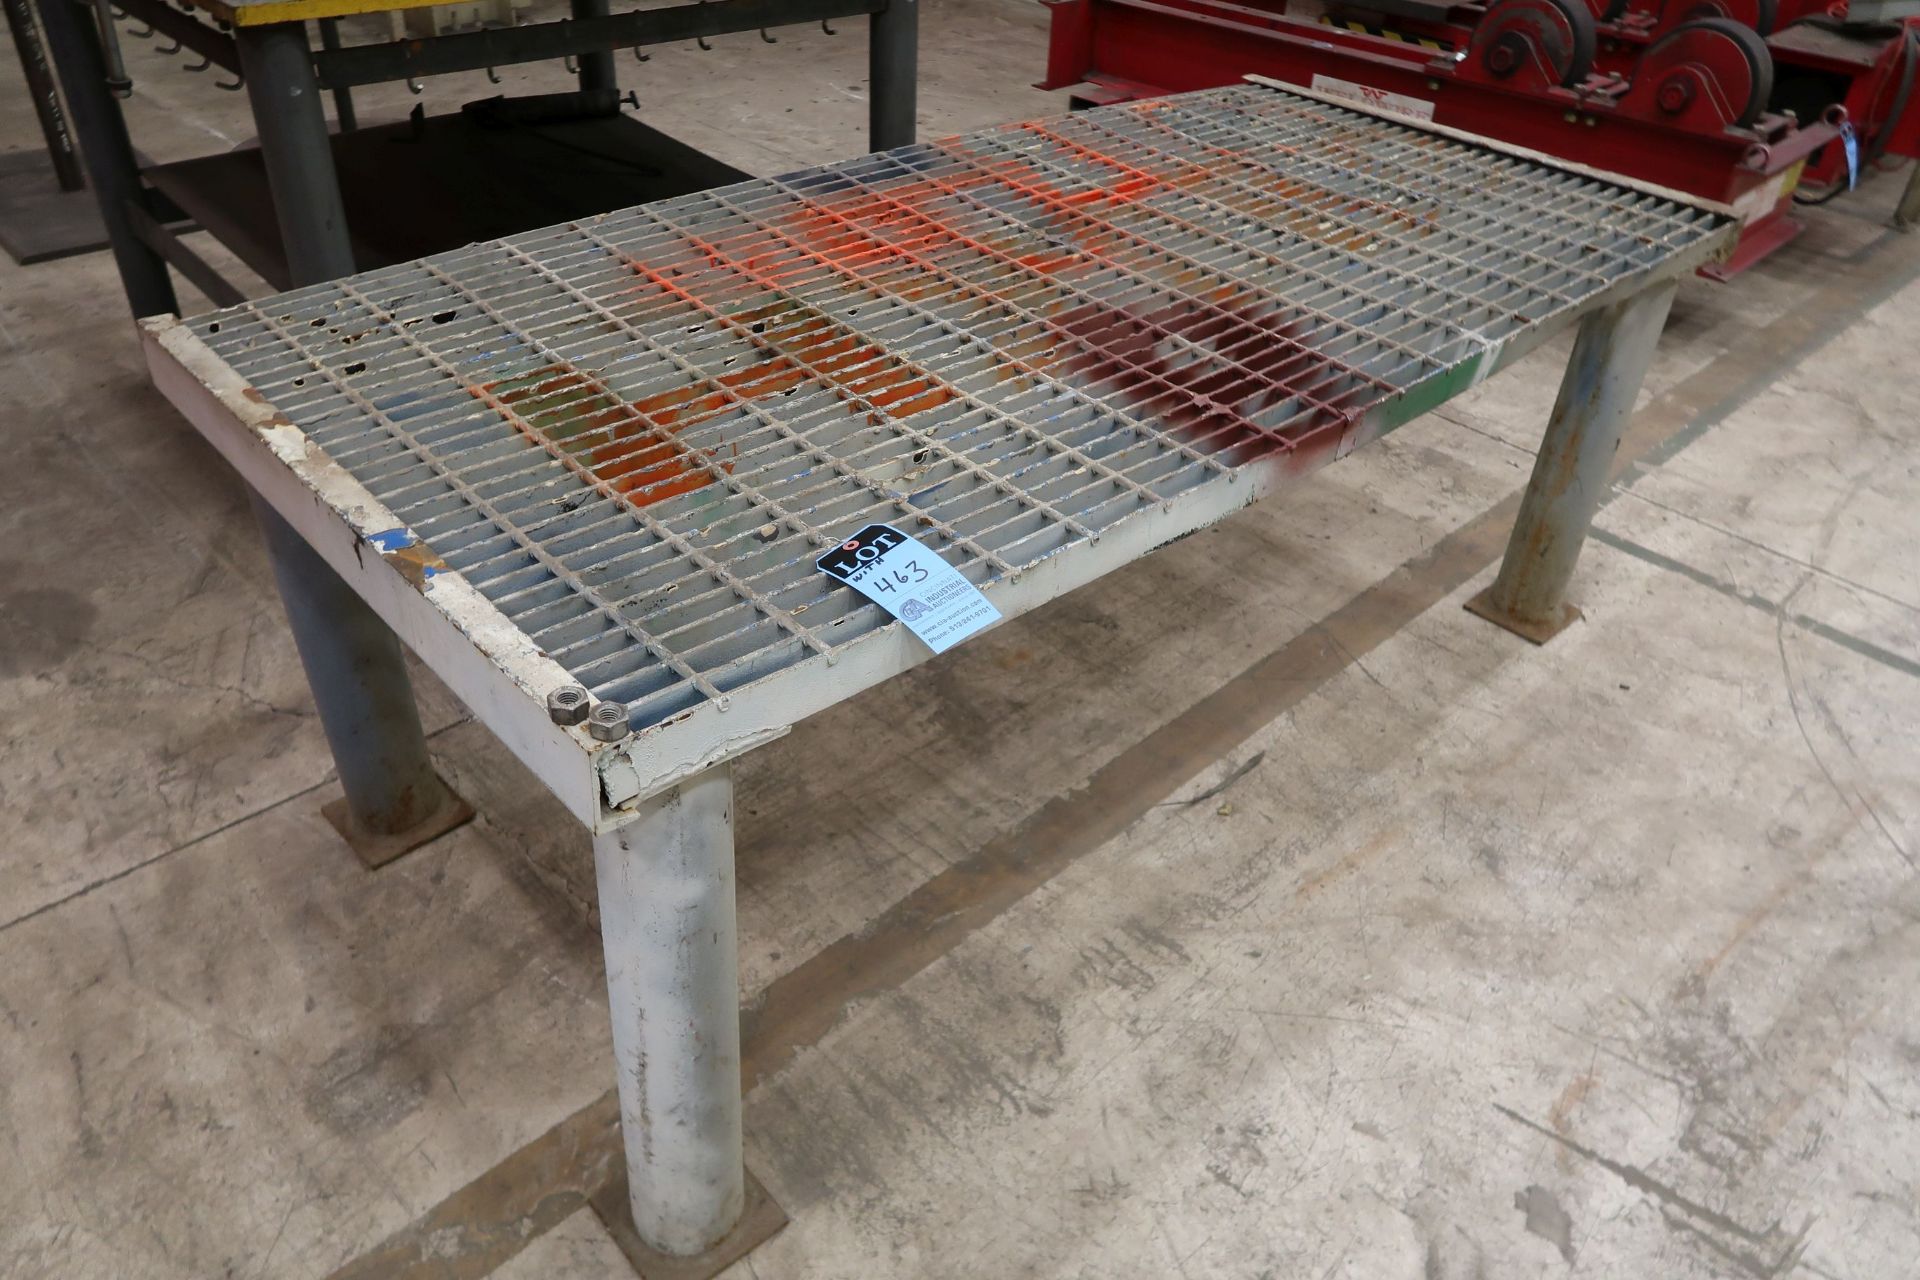 48" X 48" X 37" HIGH X 1" THICK TOP PLATE STEEL PIPE WELDED FRAME WELDING TABLE W/ STEEL GRATED - Image 2 of 4